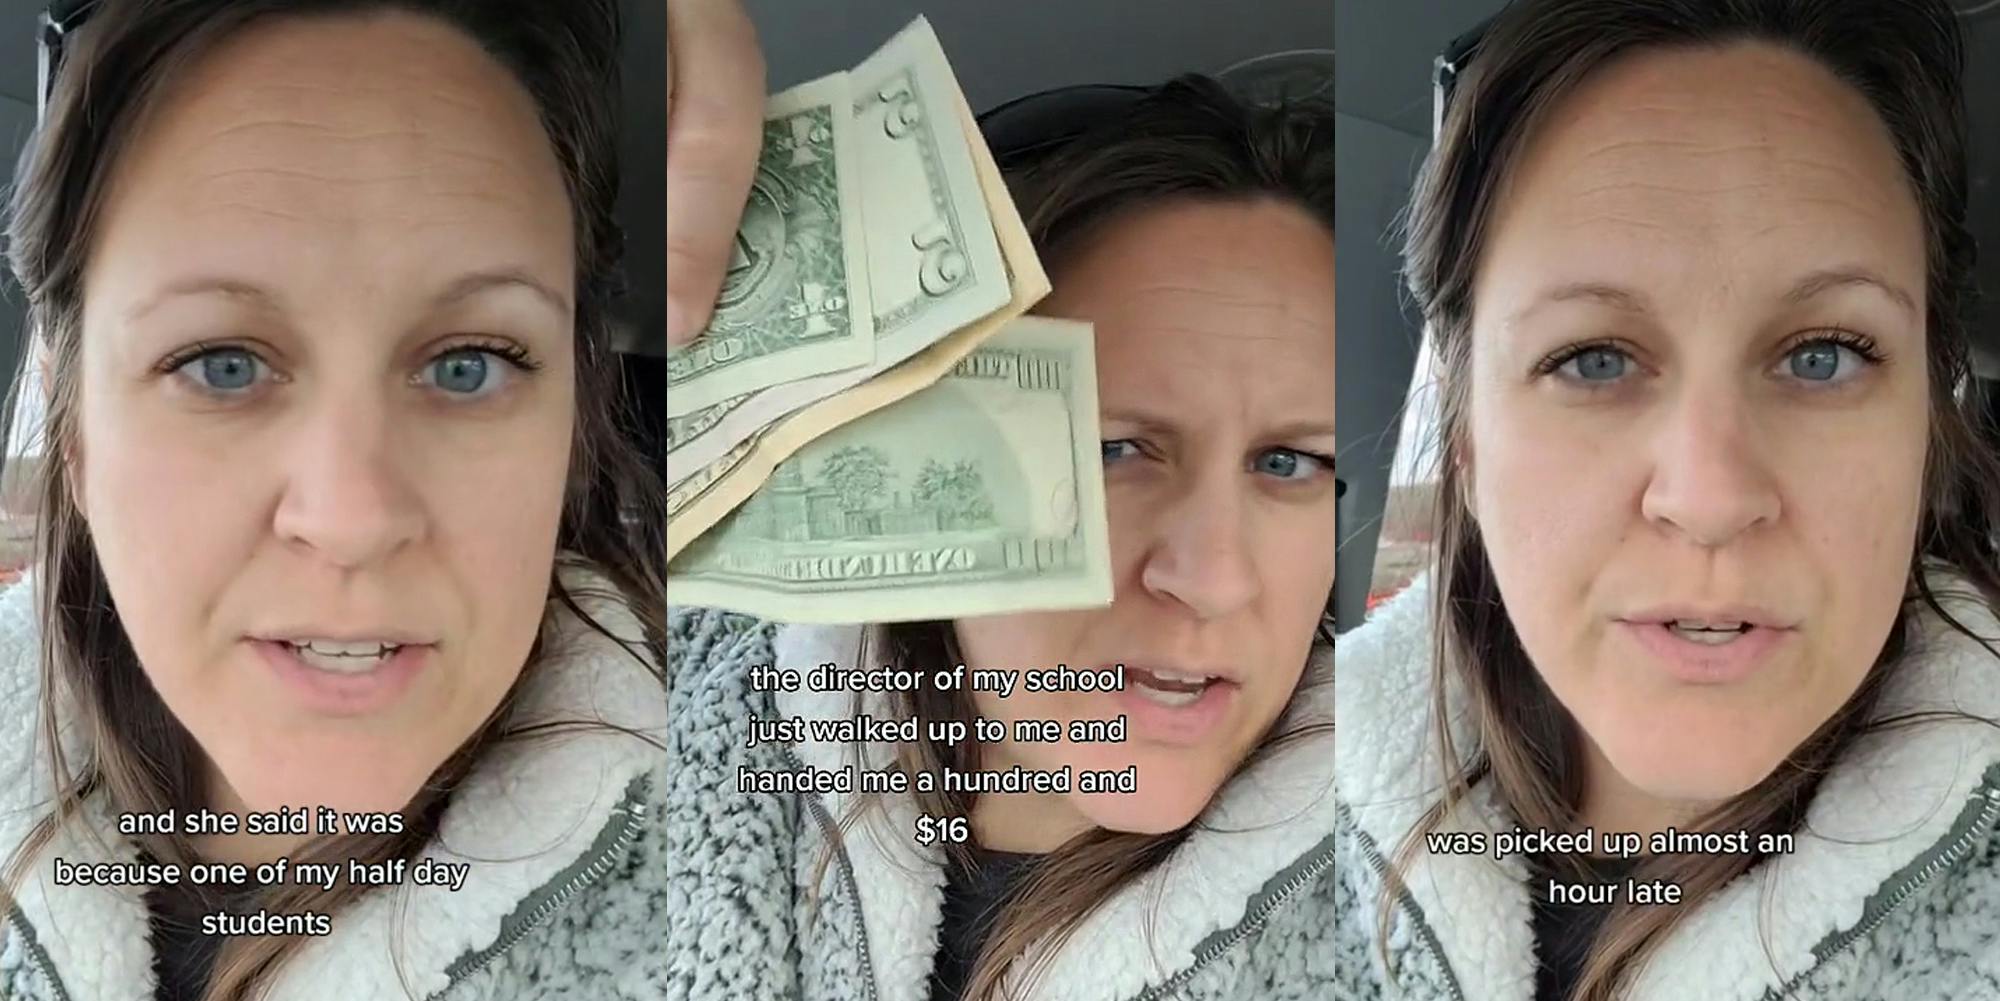 teacher speaking in car with caption "and she said it was because one of my half day students" (l) teacher speaking in car holding cash with caption "the director of my school just walked up to me and handed me a hundred and $16" (c) teacher speaking in car with caption "was picked up almost an hour late" (r)